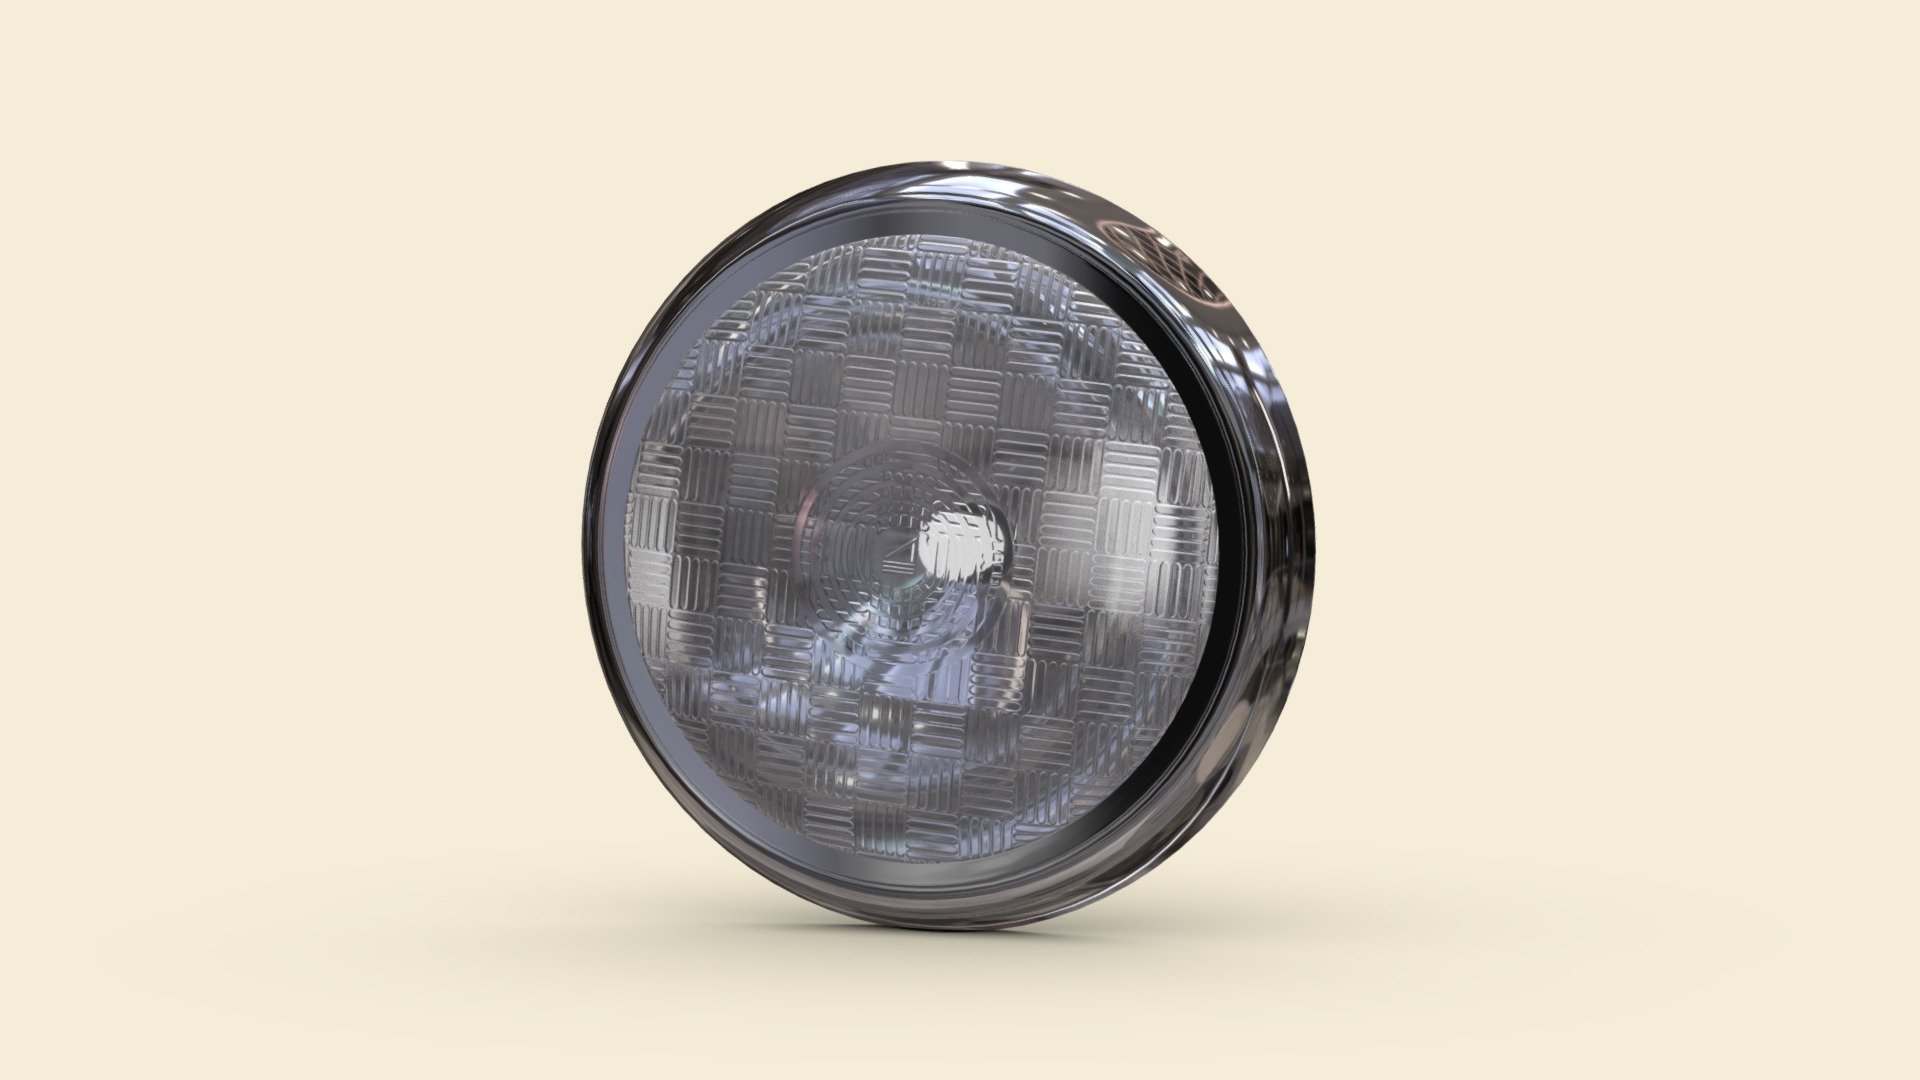 7inch Headlight with bulb geometry inside (no filament, just bulb shape).

Height &amp; Normal texture for the headlight glass. UV mapped for front and back of headlight cover if you wish to add your own texture on front or back.

Have provided a download with the Maya file too.

Enjoy

Cheers 3d model